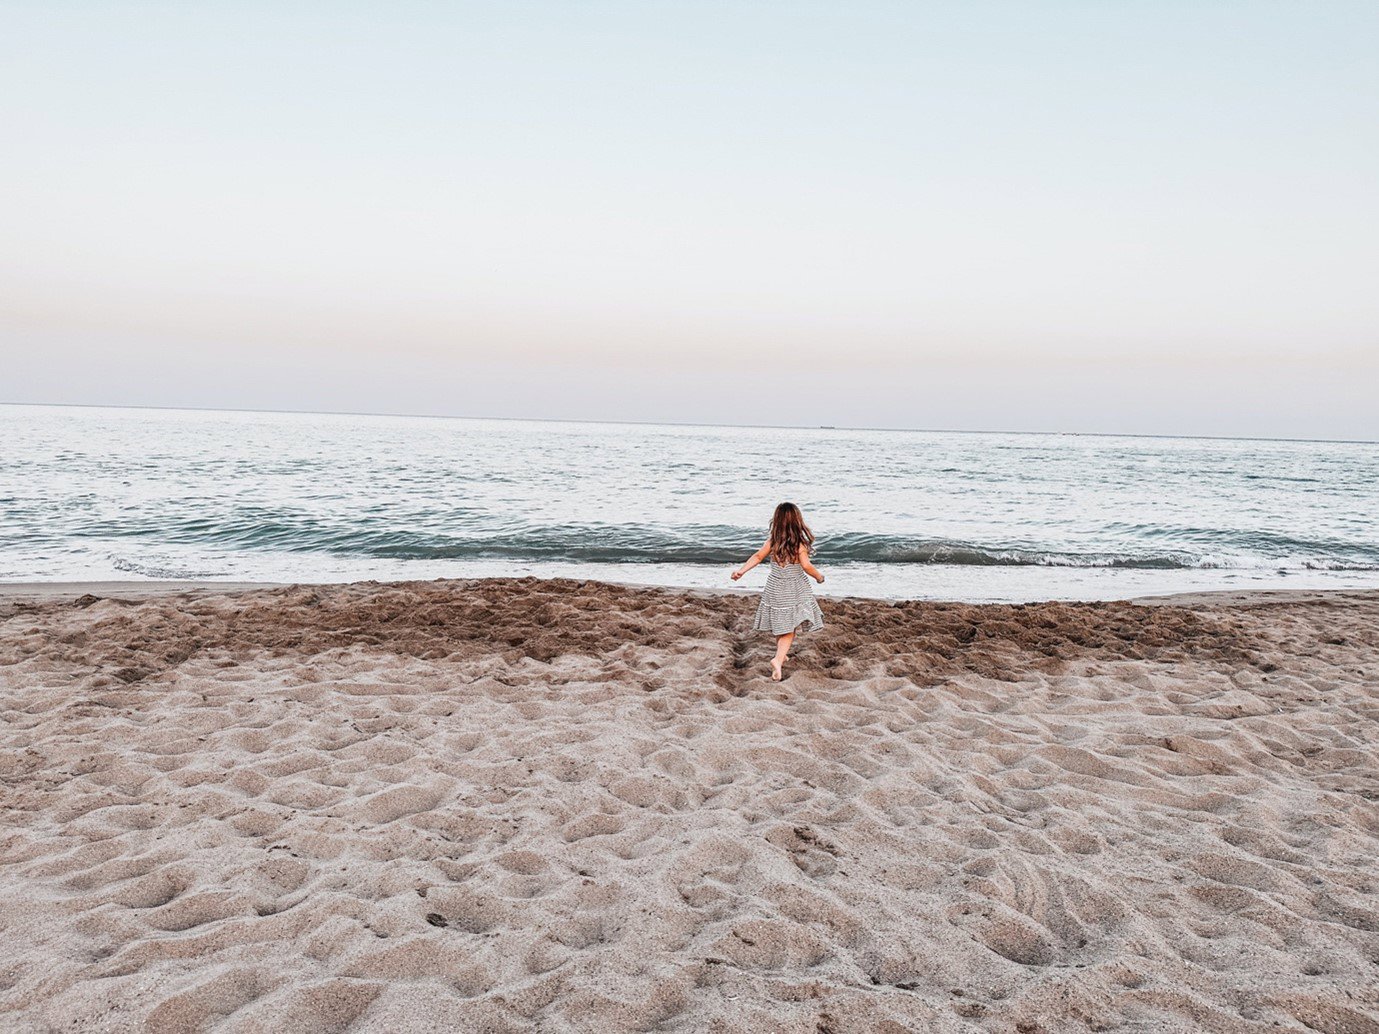 A young girl on the beach running towards the sea